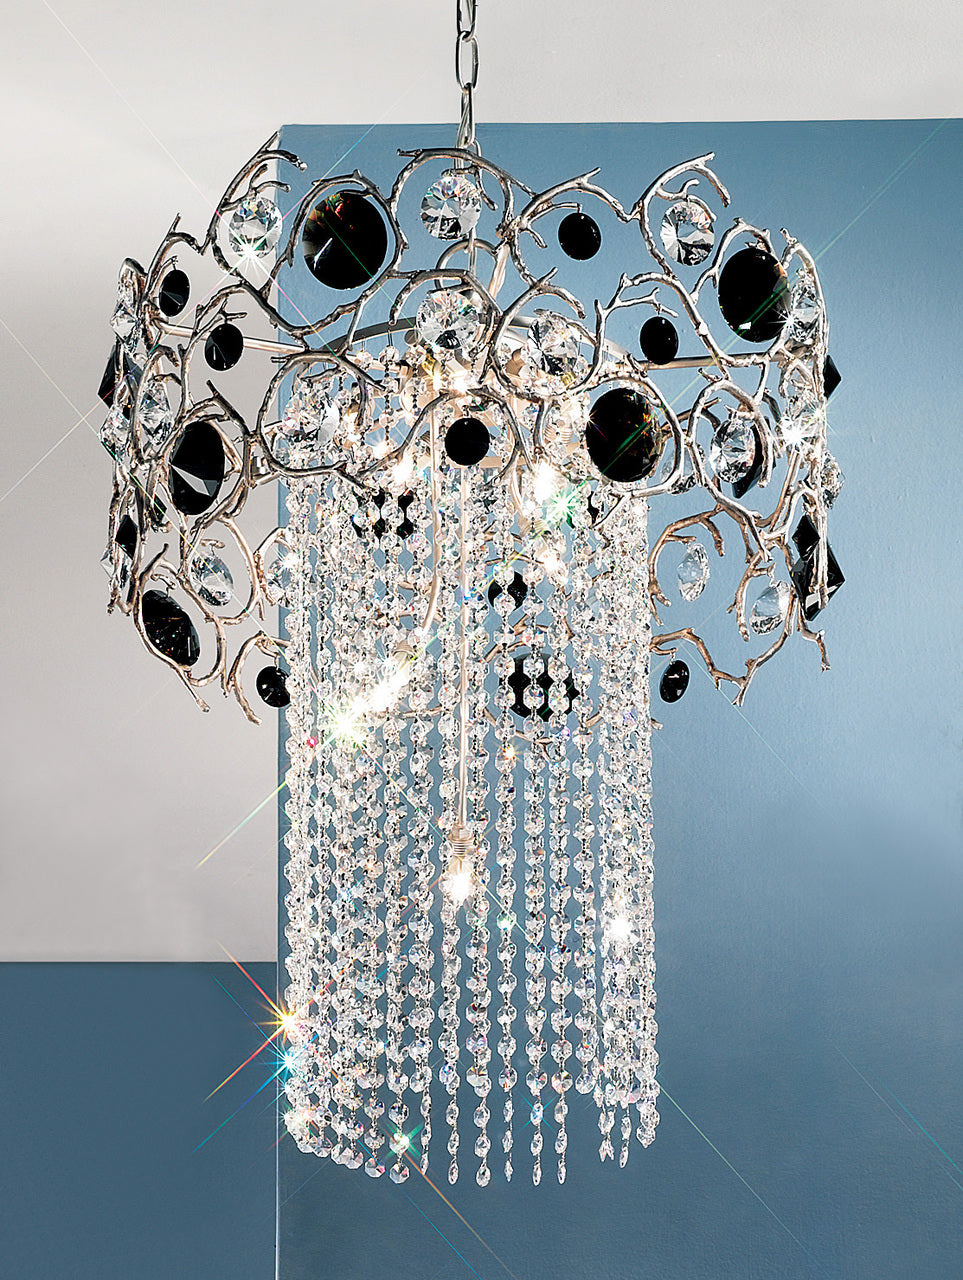 Classic Lighting 10034 NBZ AGAT Foresta Colorita Crystal Chandelier in Natural Bronze (Imported from Portugal)